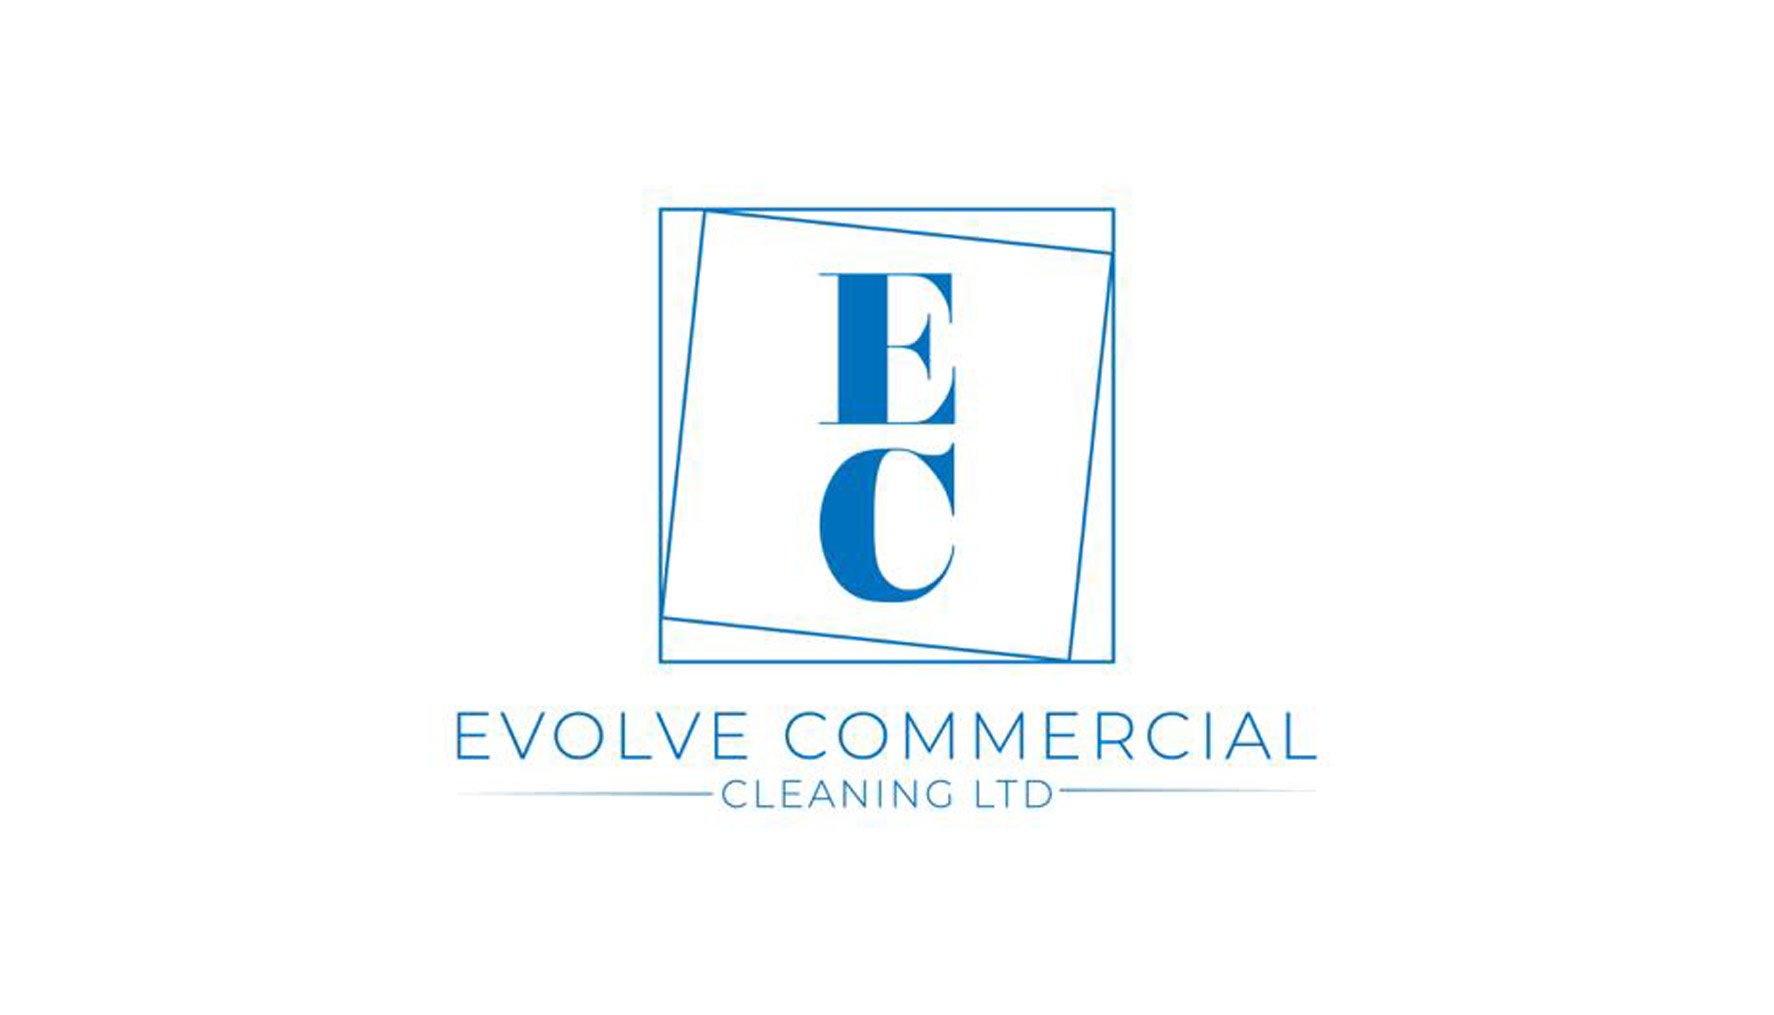 Evolve Commercial Cleaning Ltd